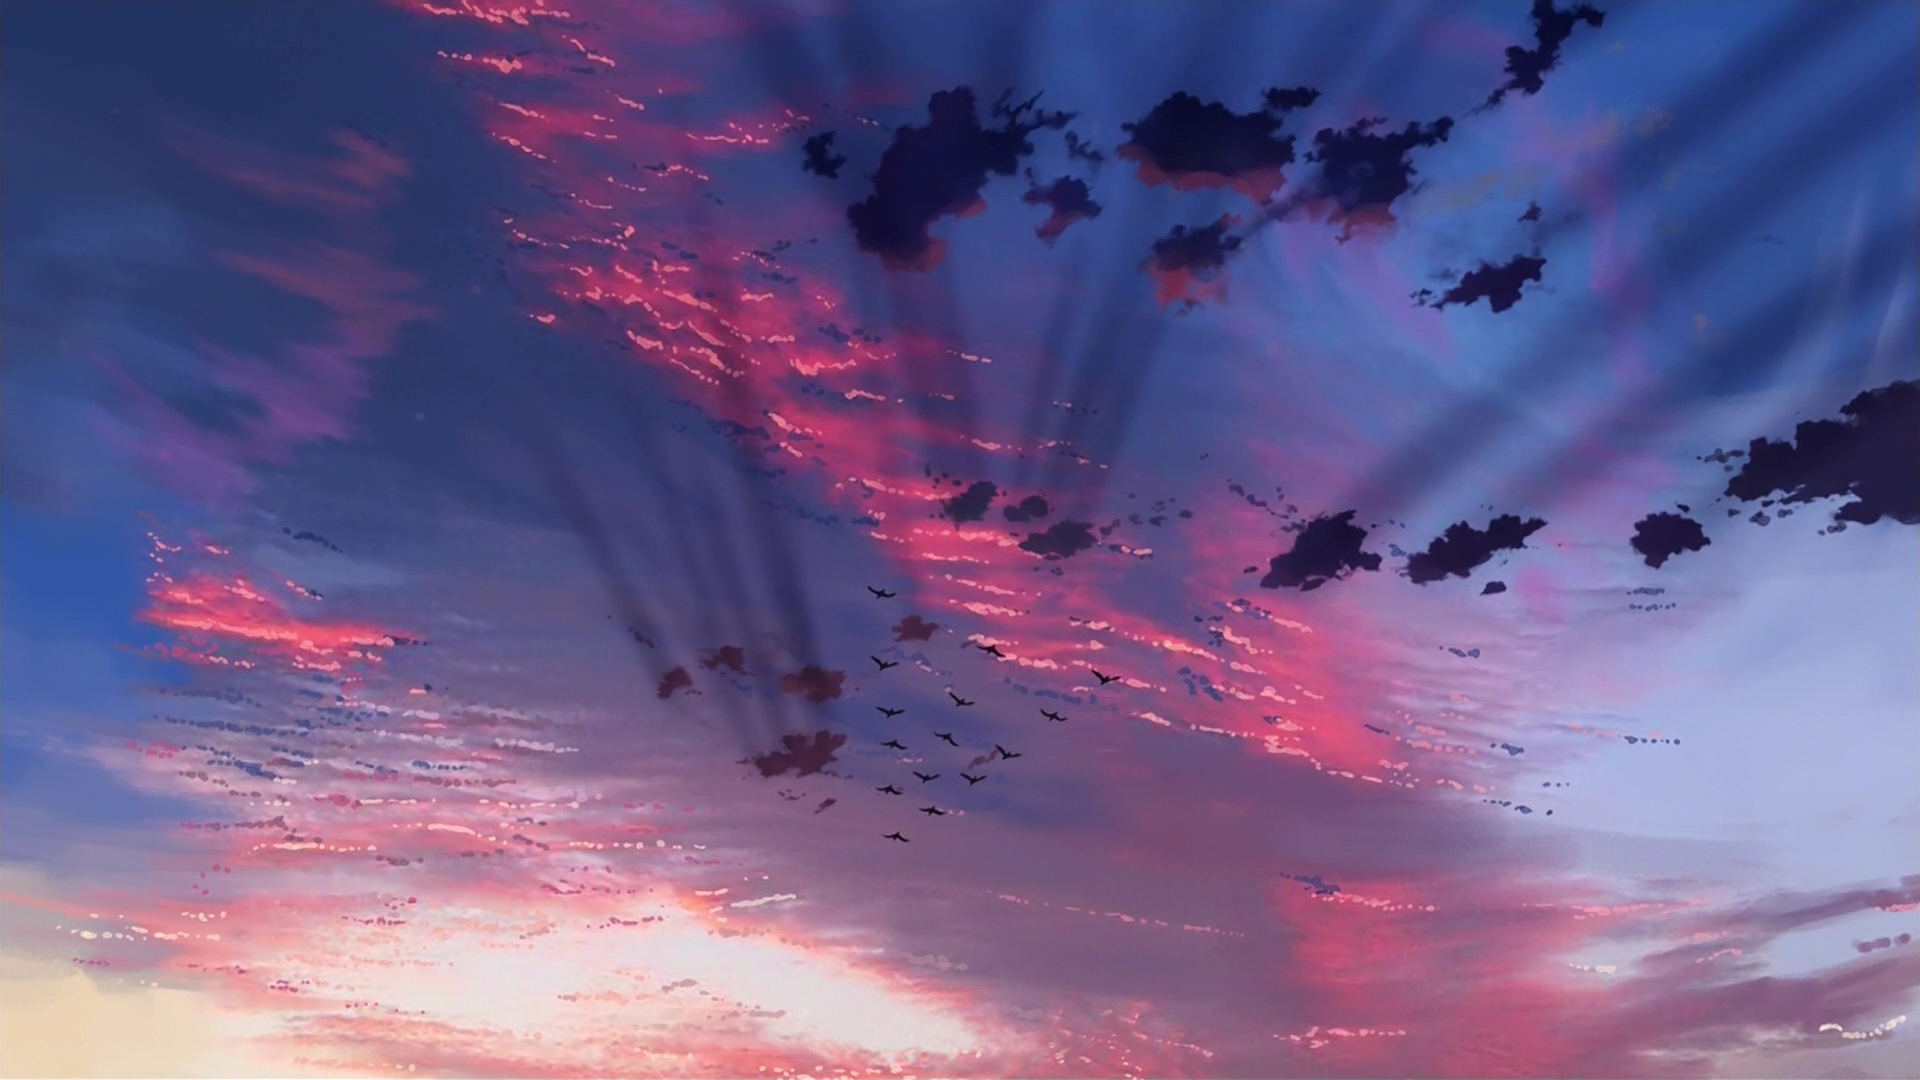 birds, illustrations, Makoto Shinkai, The Place Promised in Our Early Days, skyscapes, illuminated - desktop wallpaper